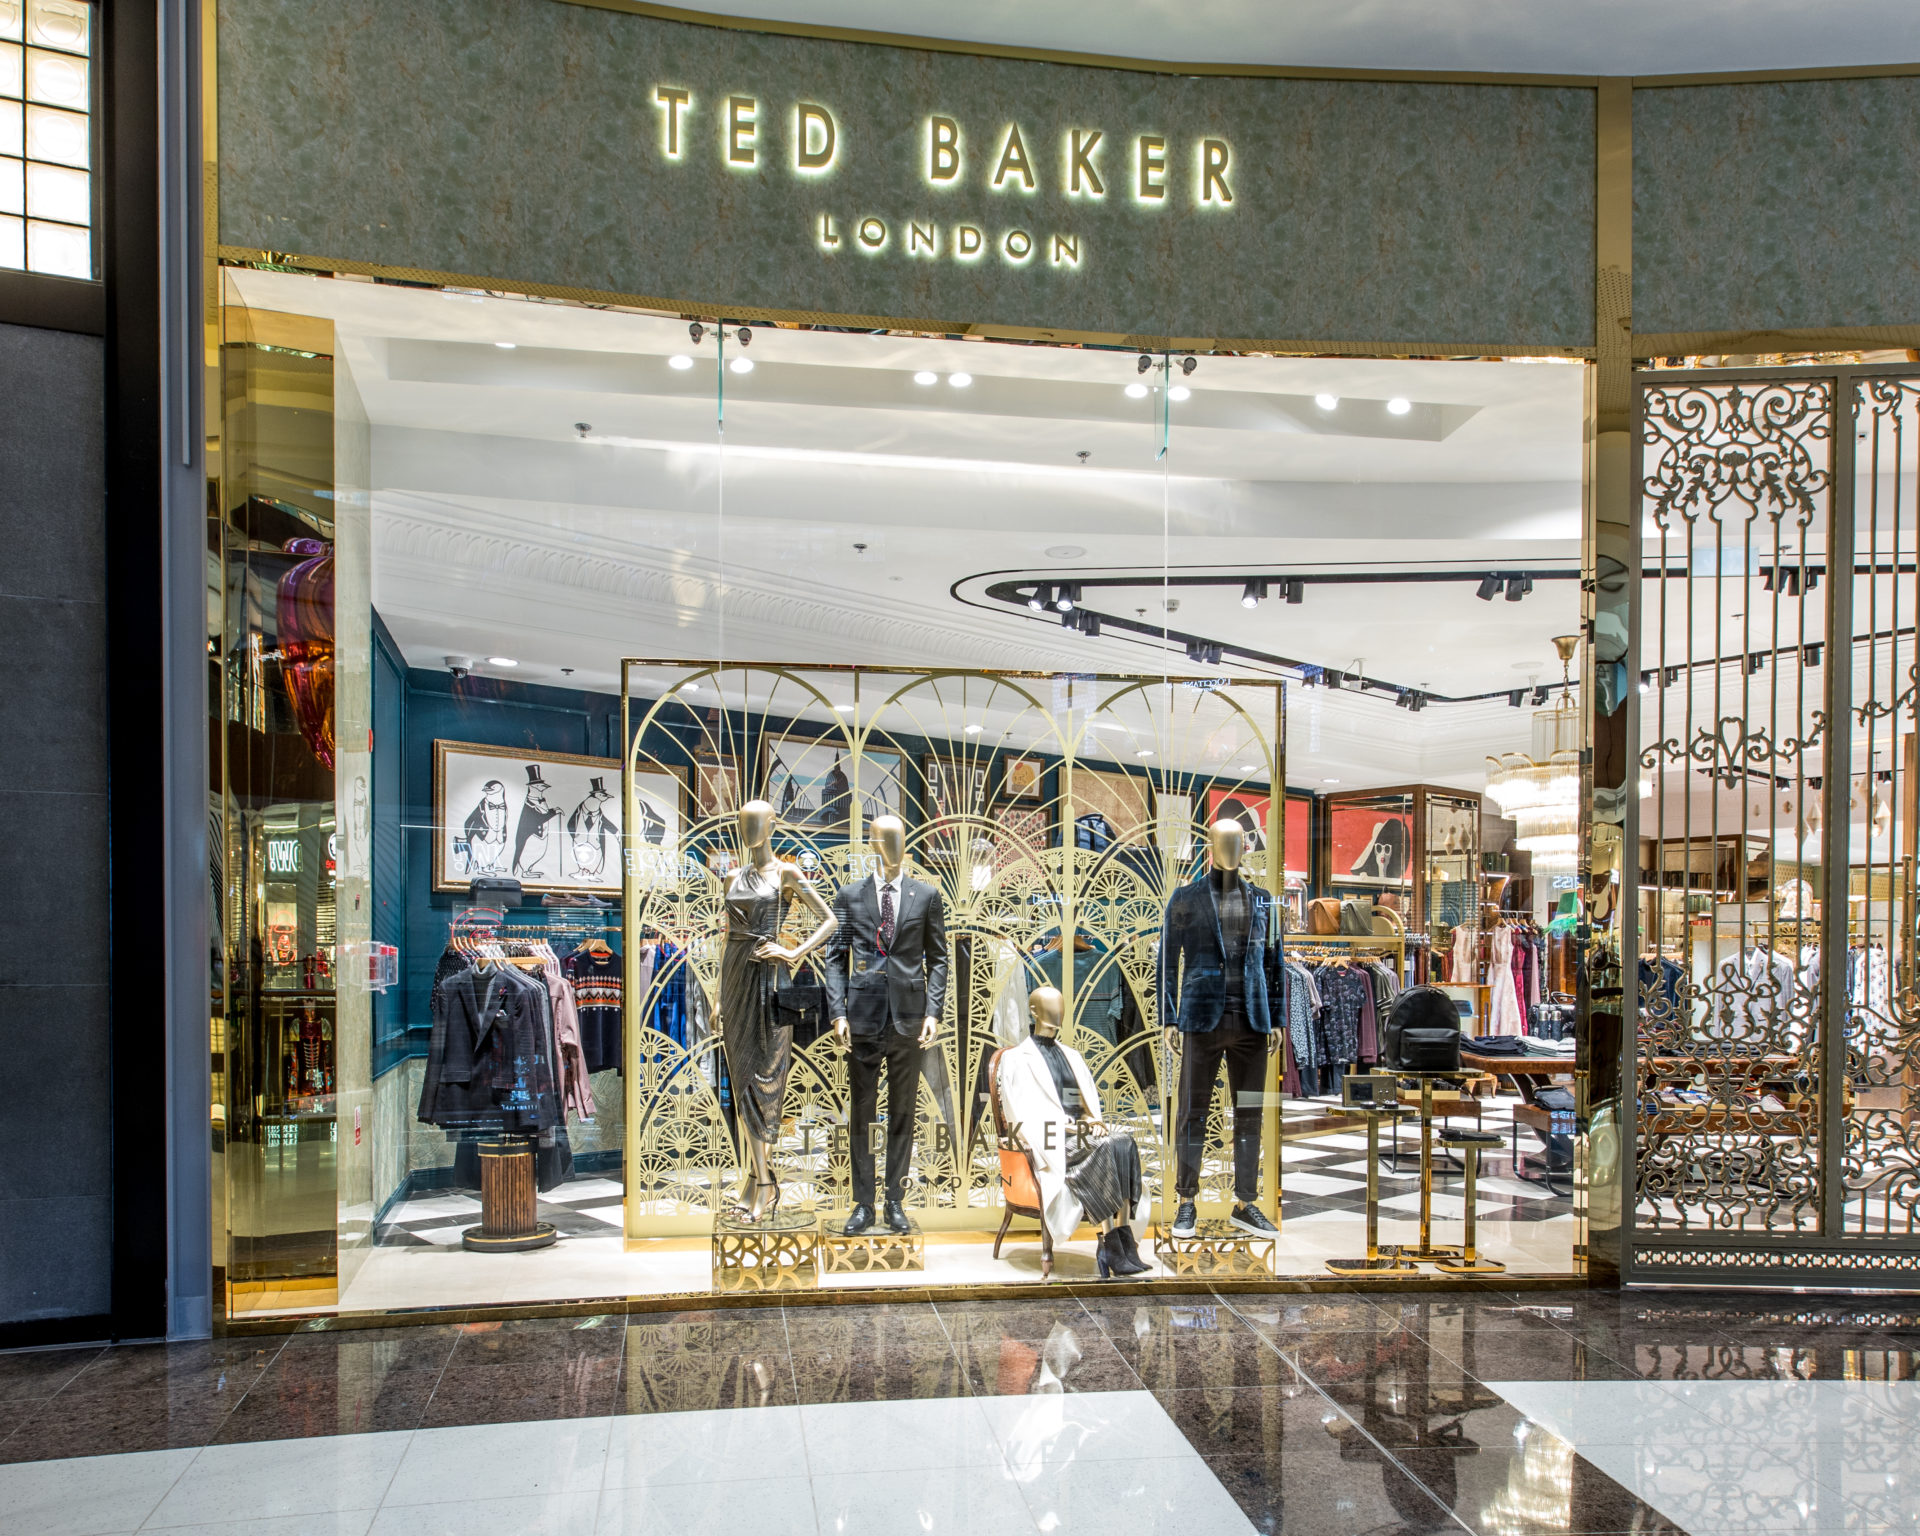 Ted Baker’s store will transport you to the famous gentlemen’s lounges ...